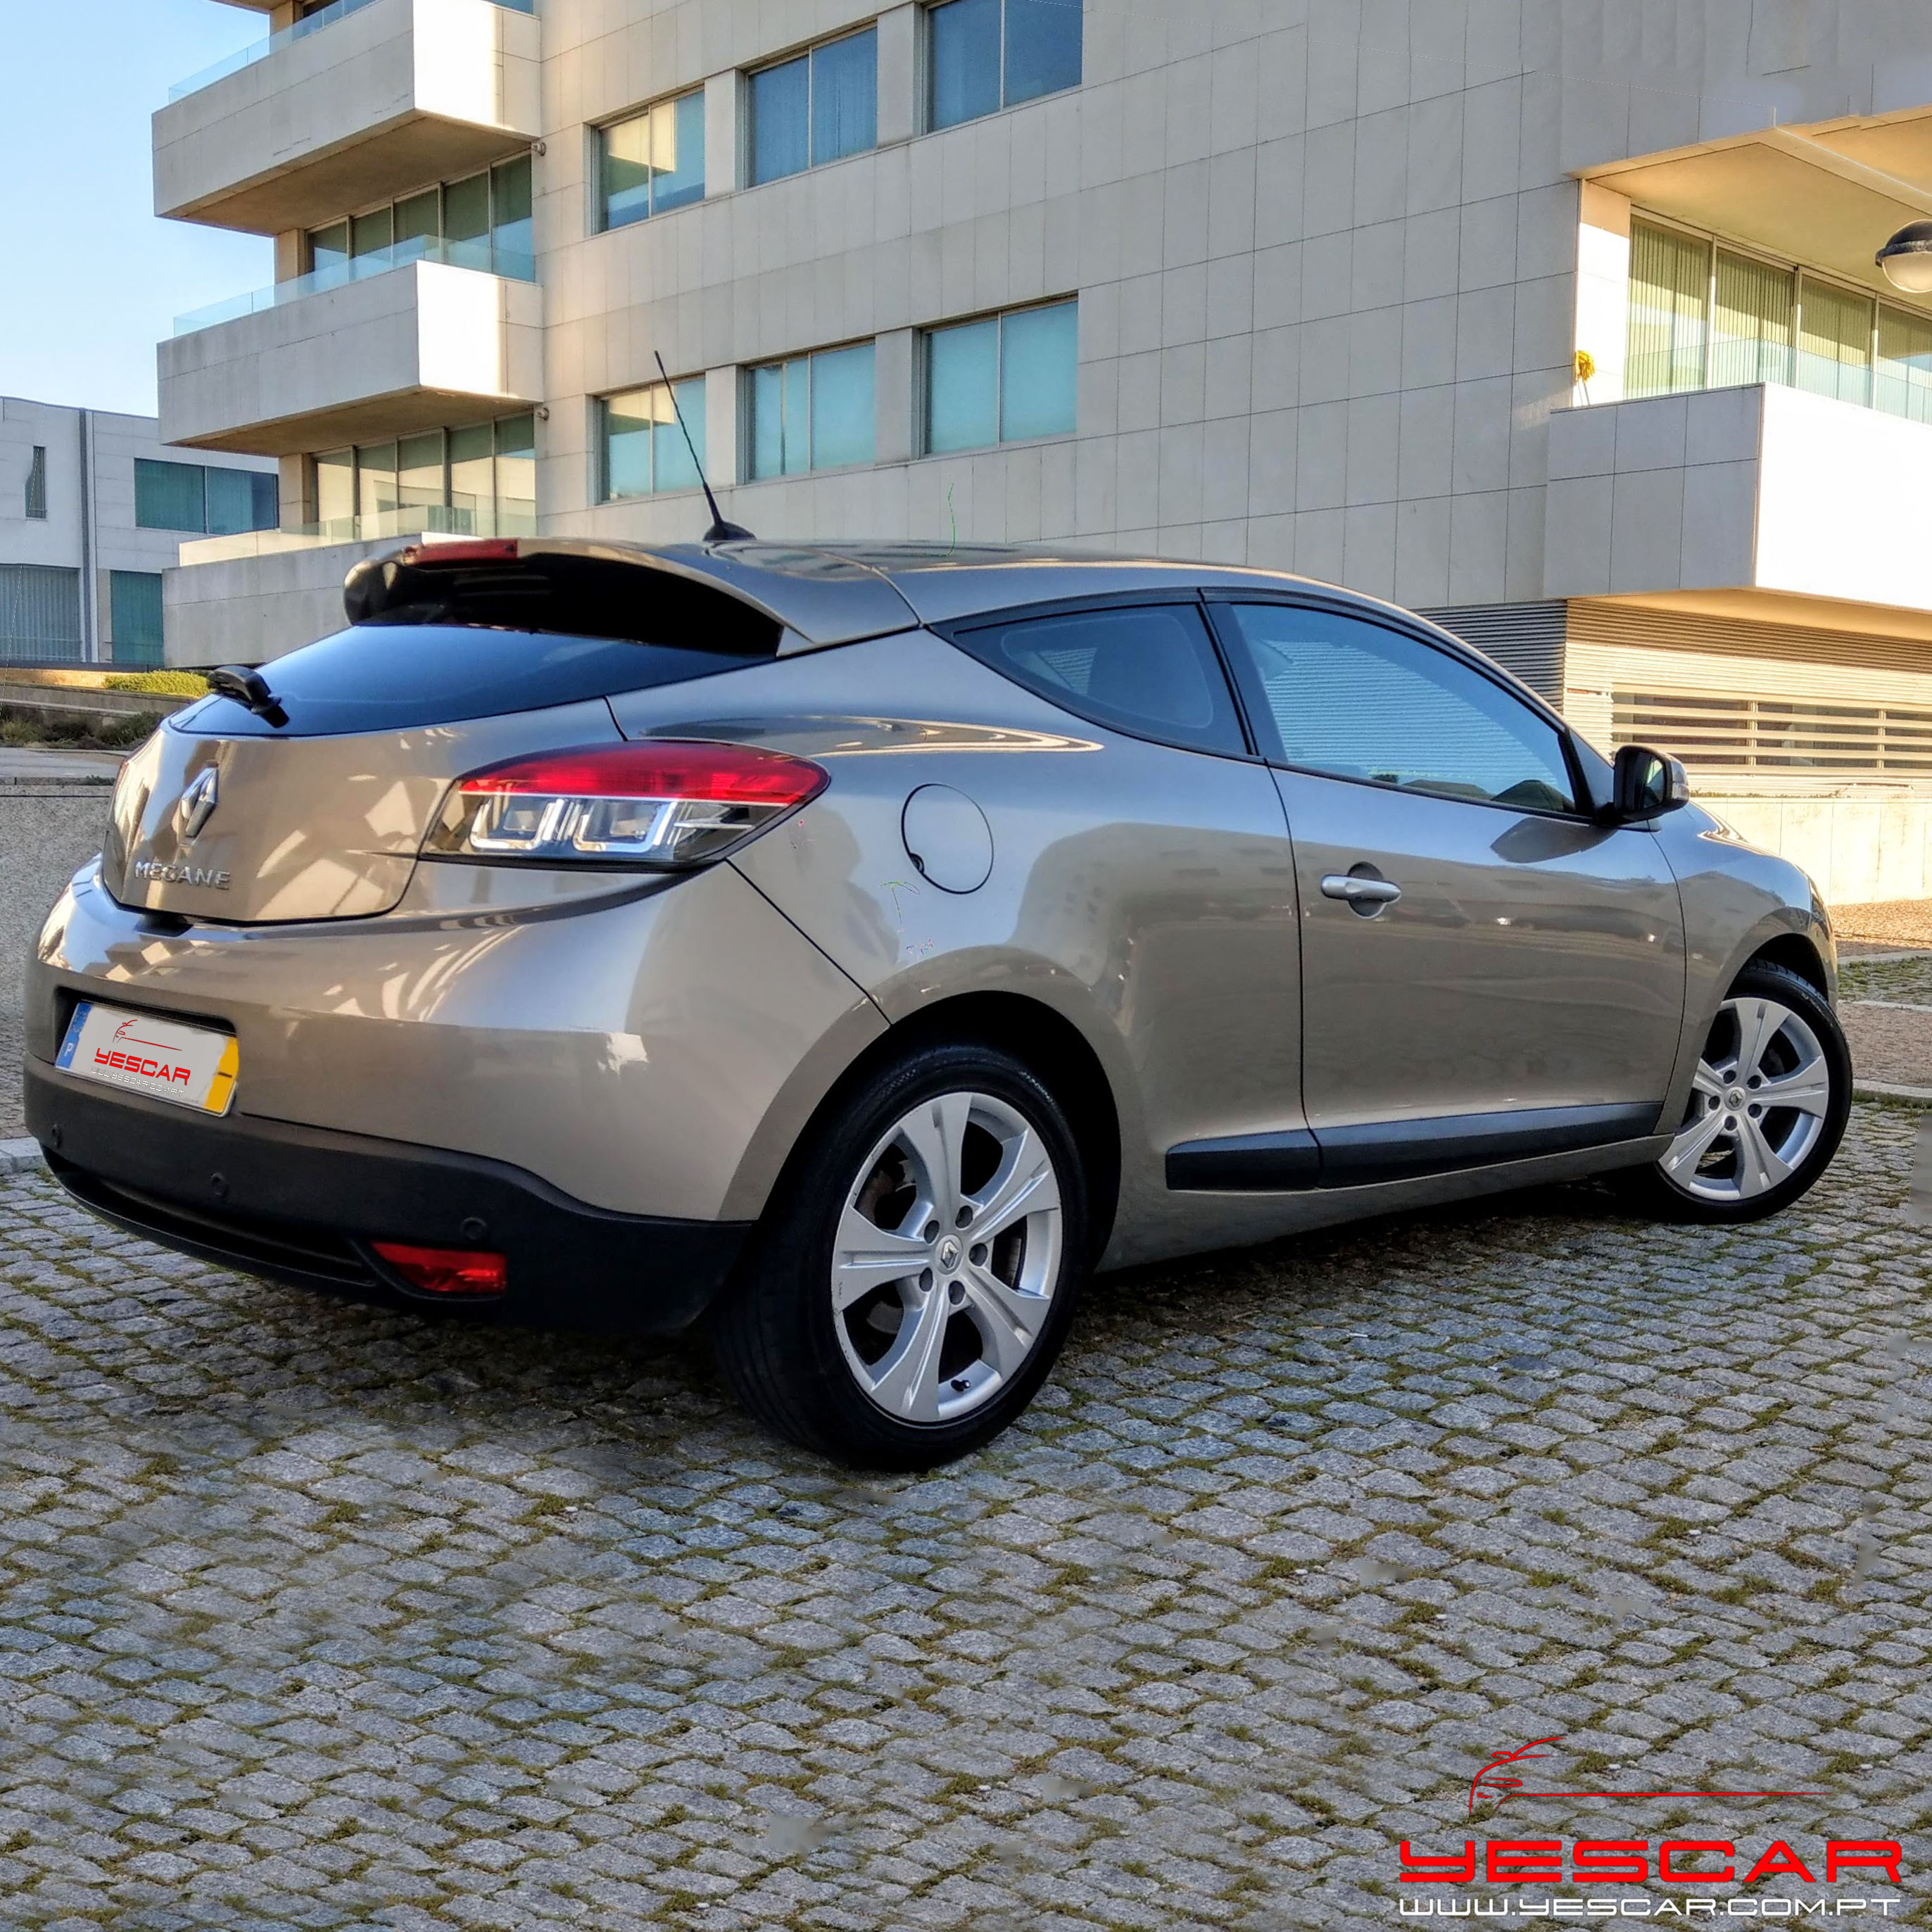 Renault Megane Coupe Yescar Automoveis (13)